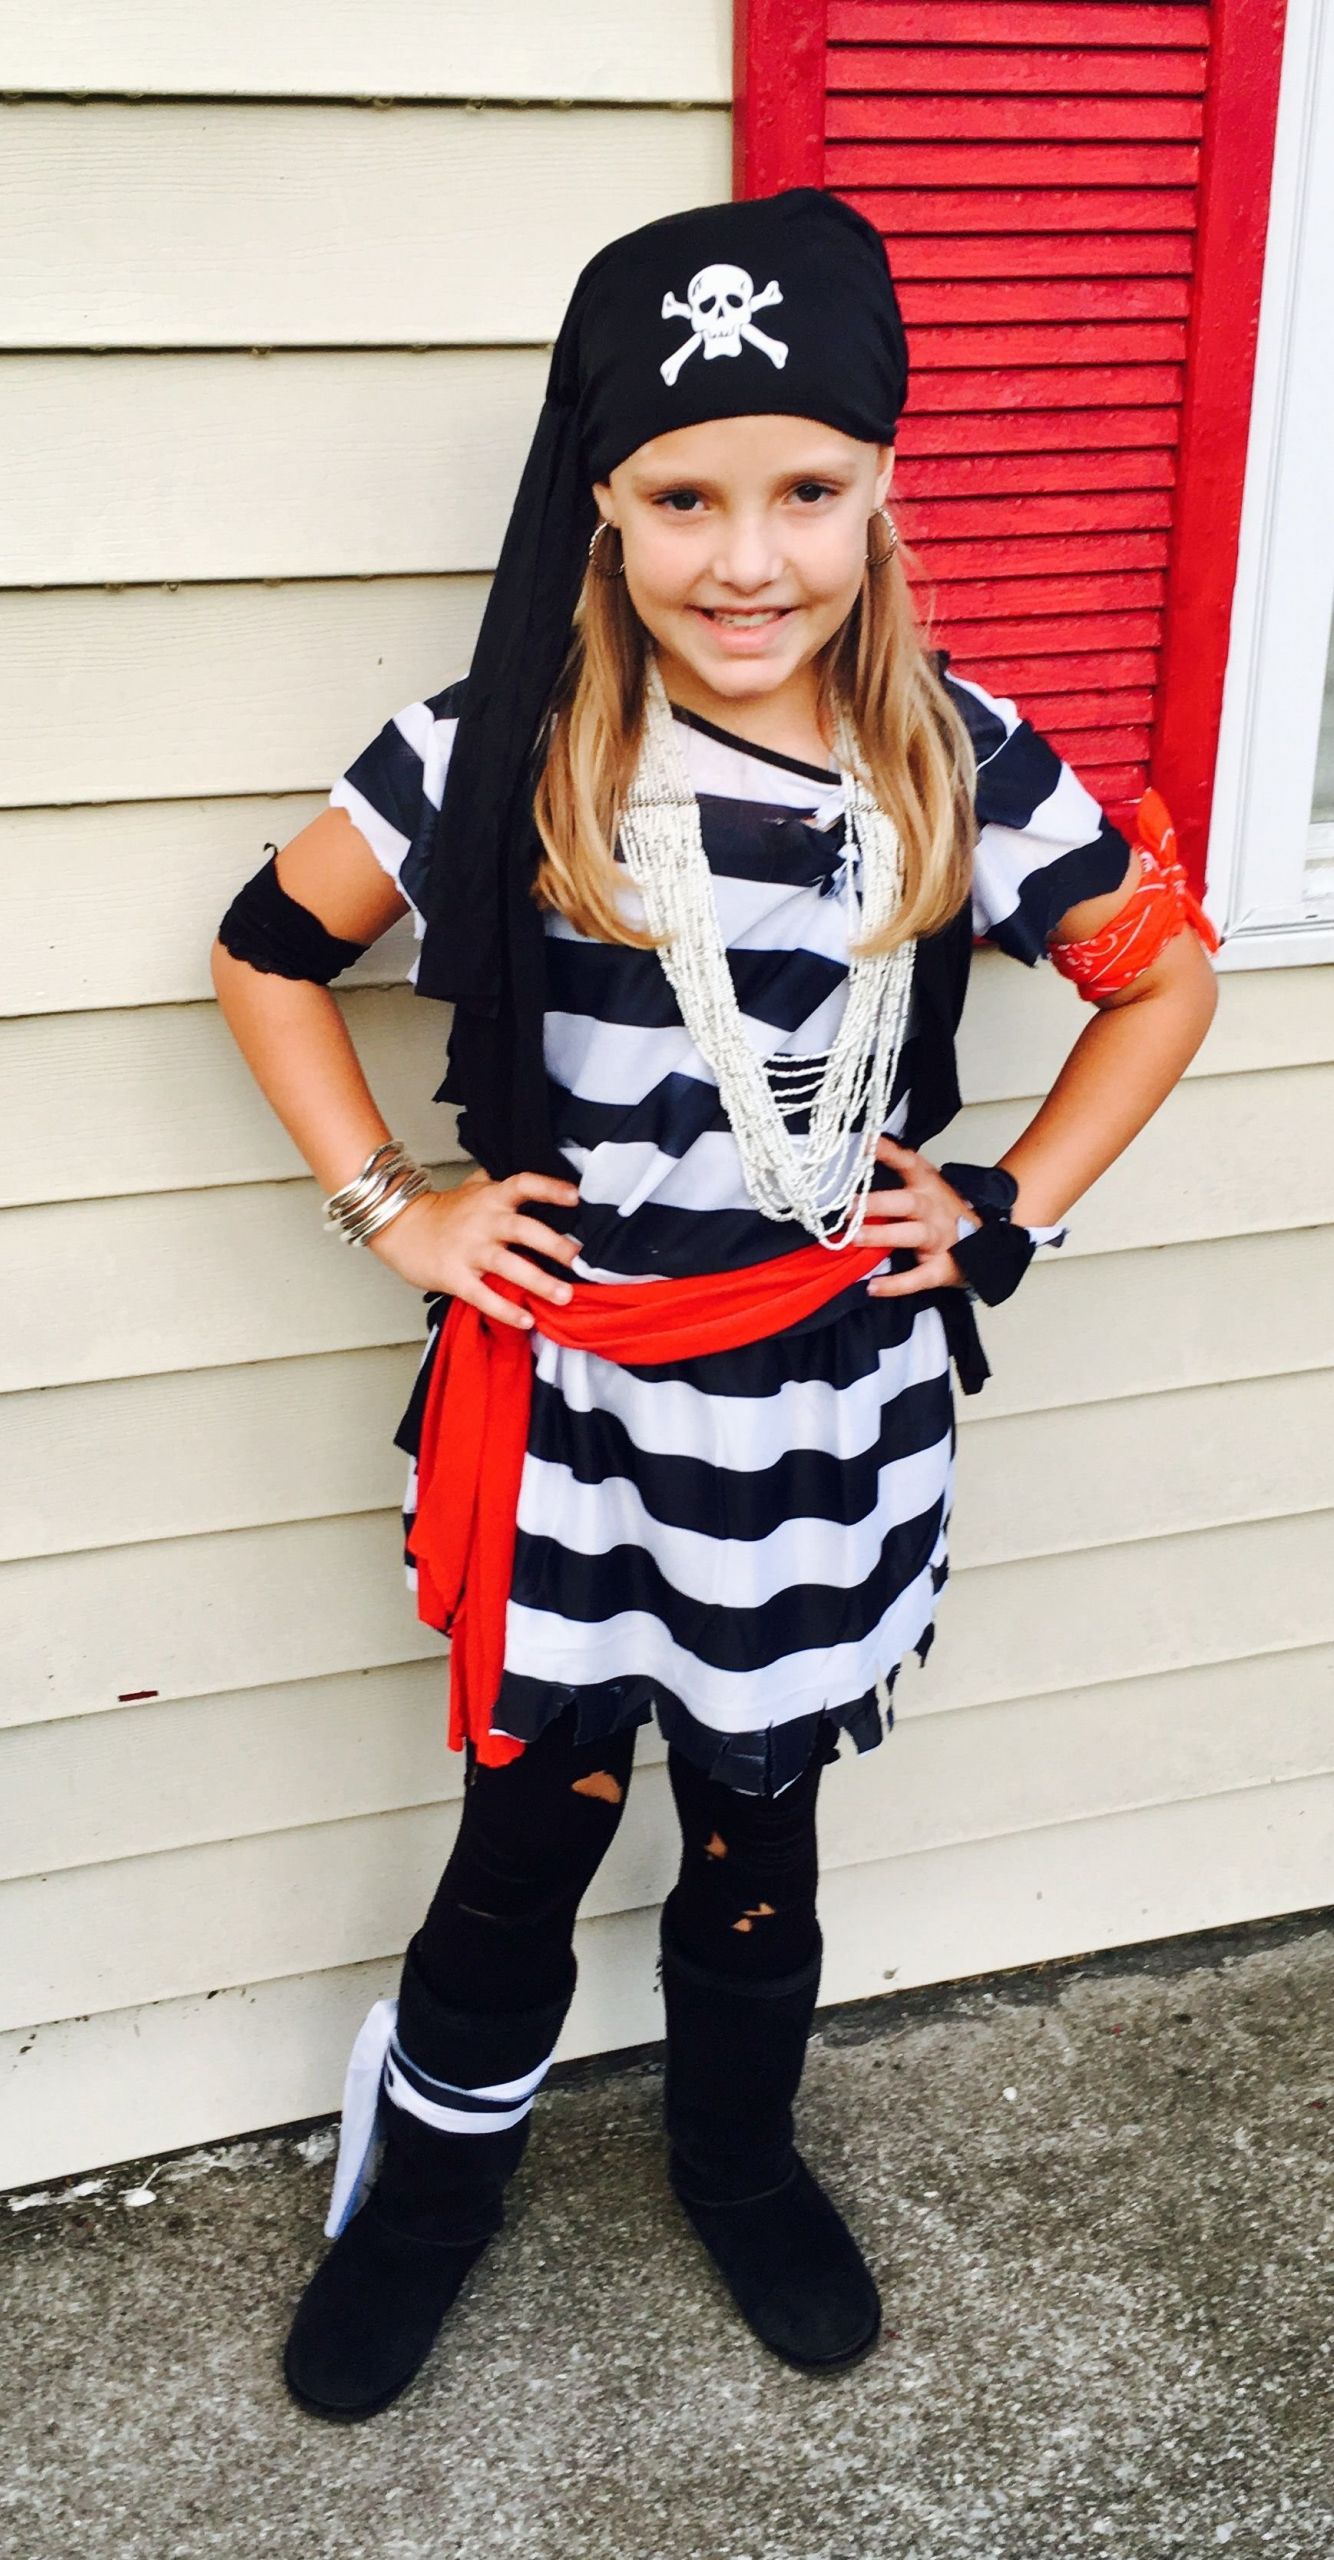 DIY Costume For Kids
 10 Attractive Homemade Pirate Costume Ideas For Kids 2019